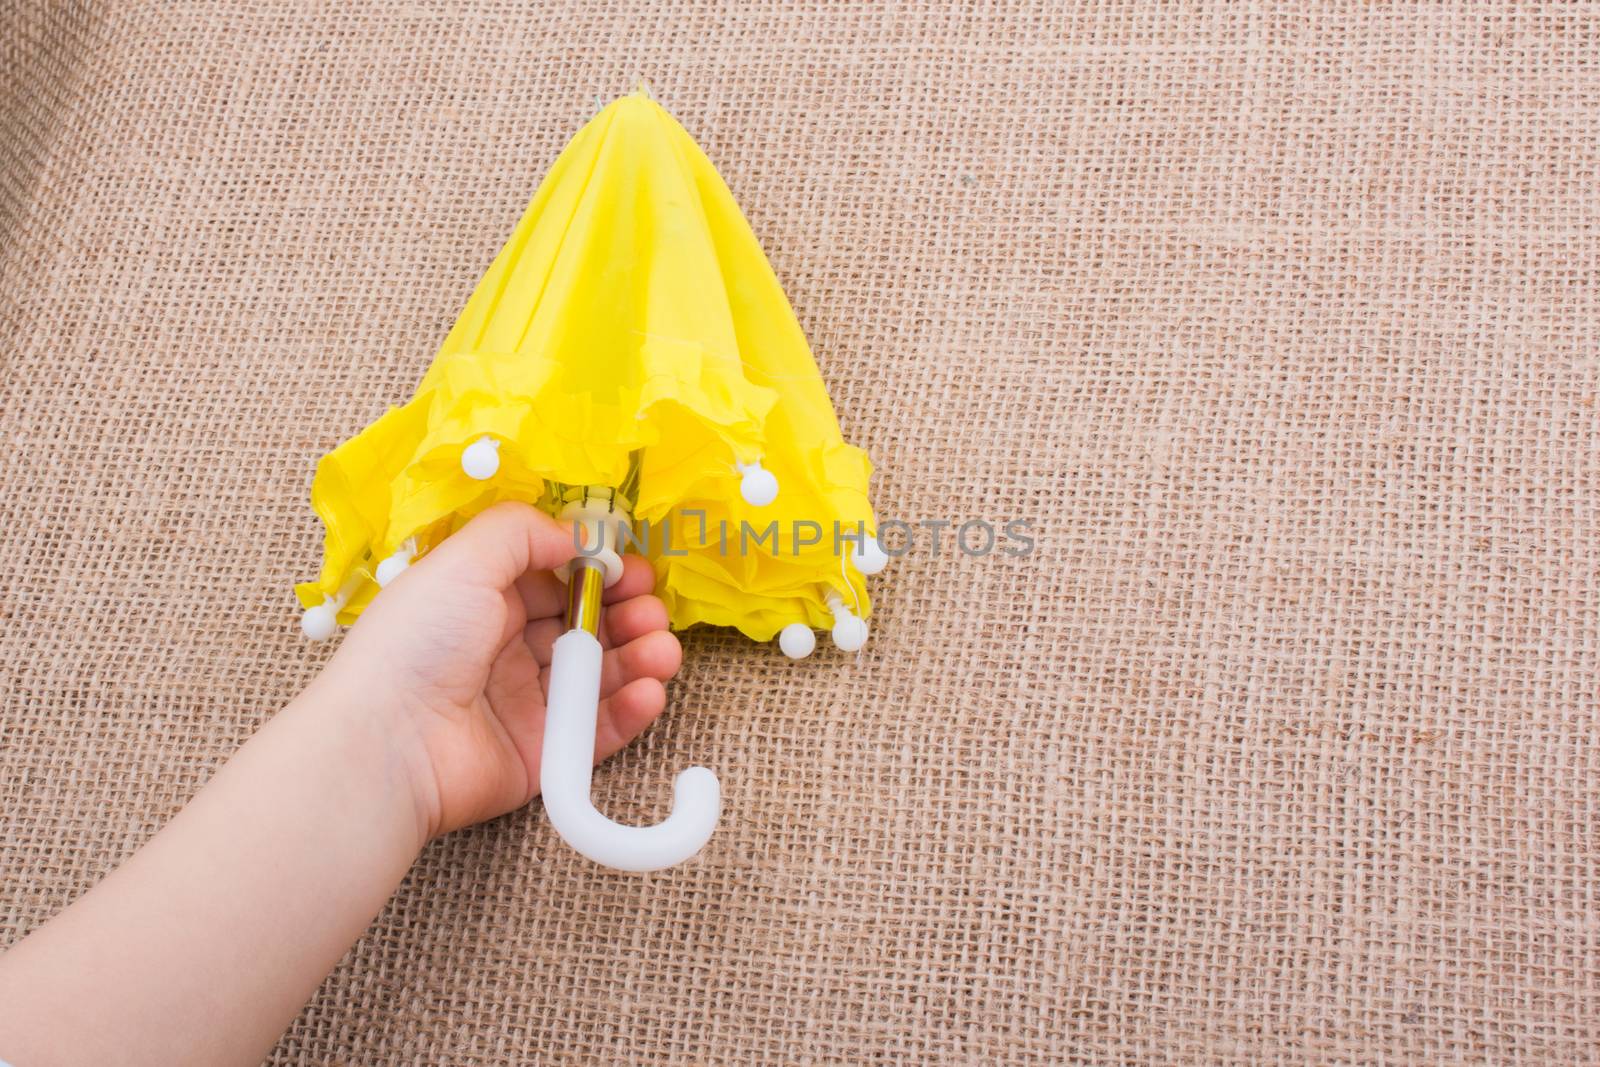 Yellow umbrella in a toddlers hand on canvas